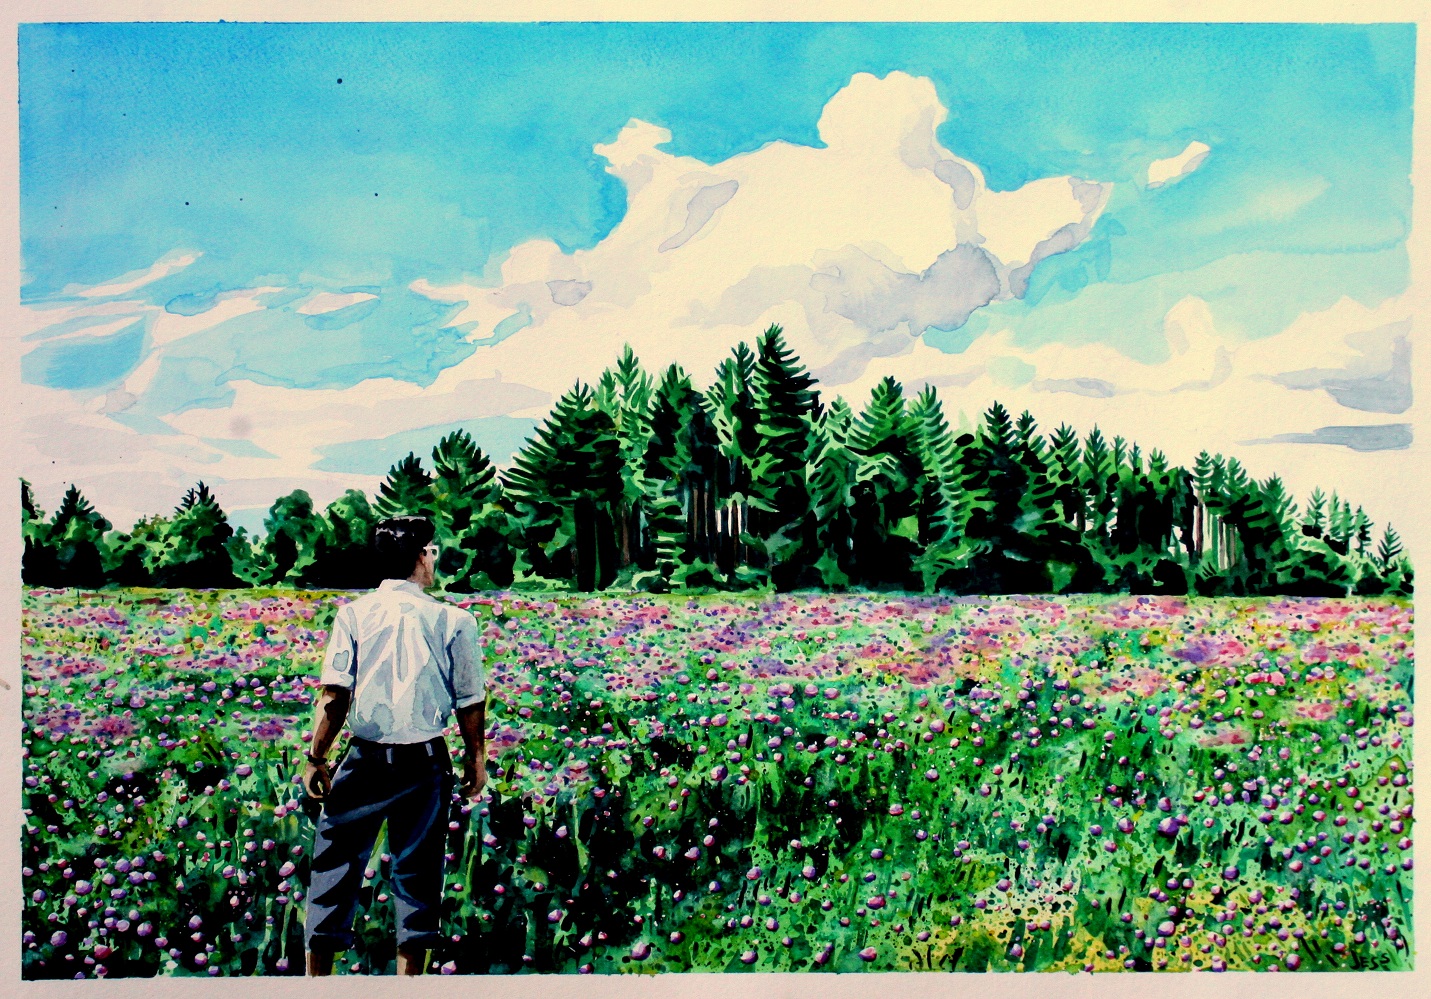 Jose in a Field of Clovers, watercolor on paper, 18x24 in, Jessica Siemens 2012